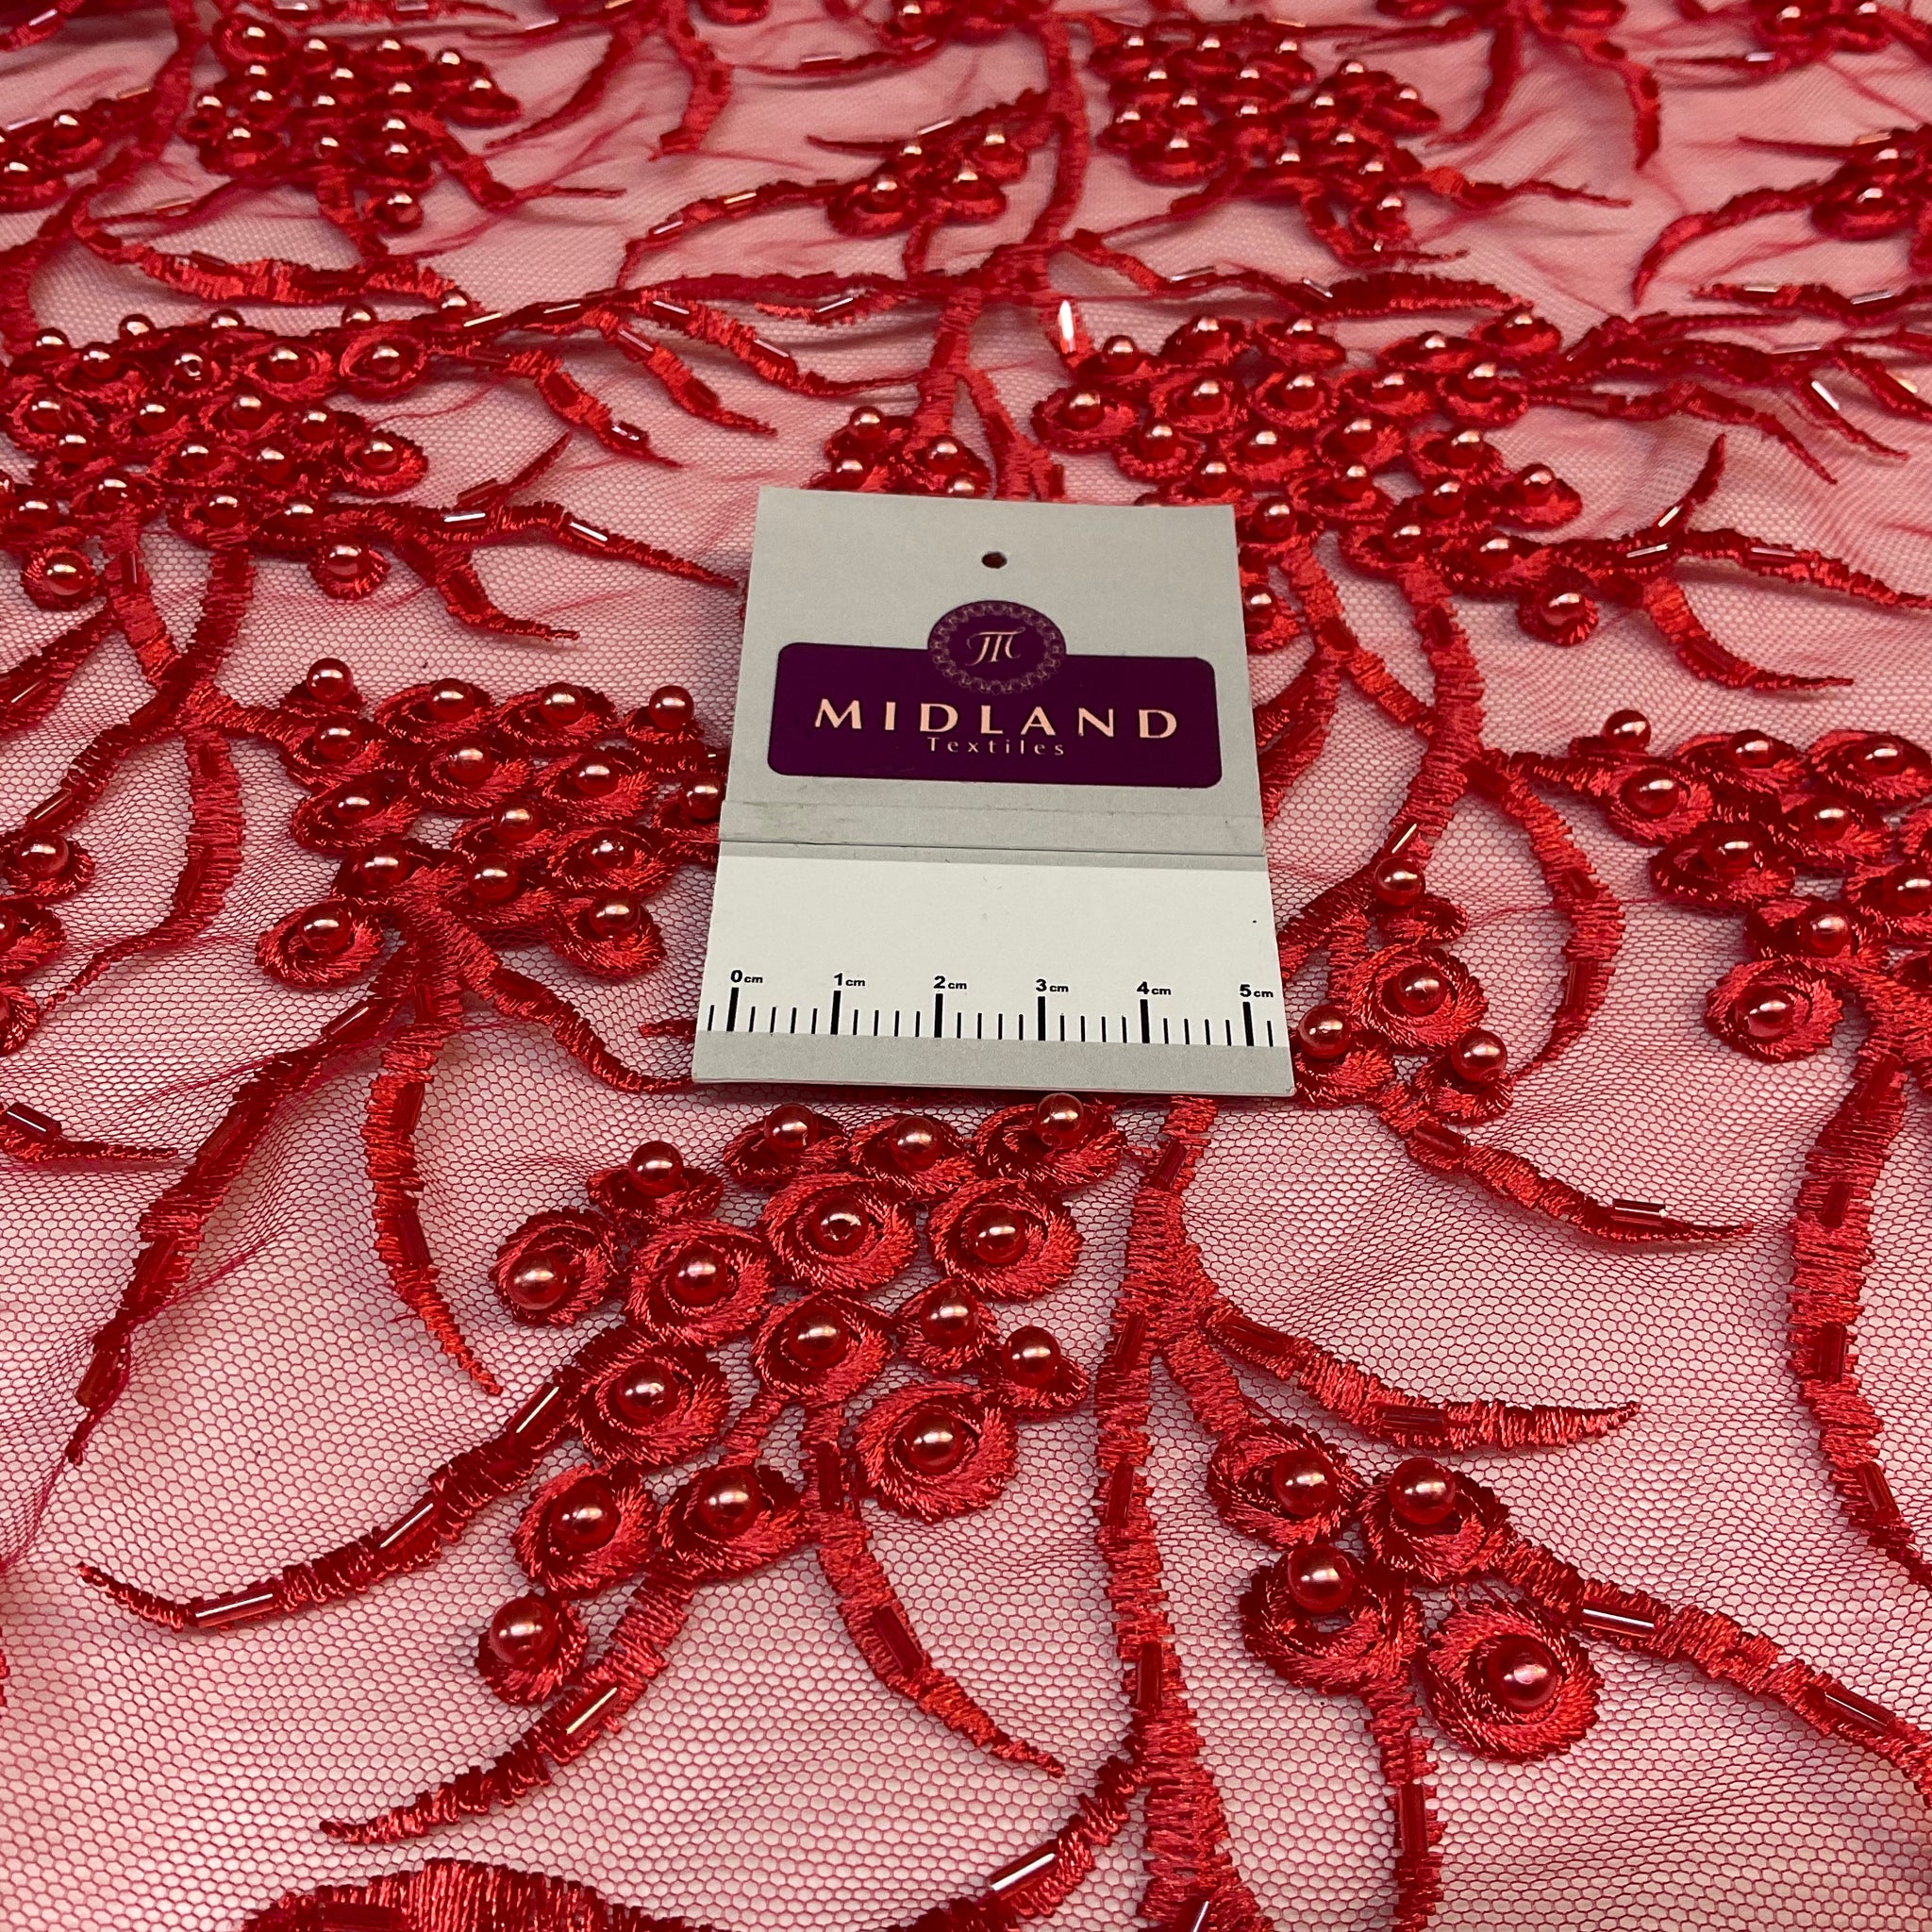 Red embroidery lace with redfaux pearls and red bungle beads - Double scalloped border Fabric - M1400-35